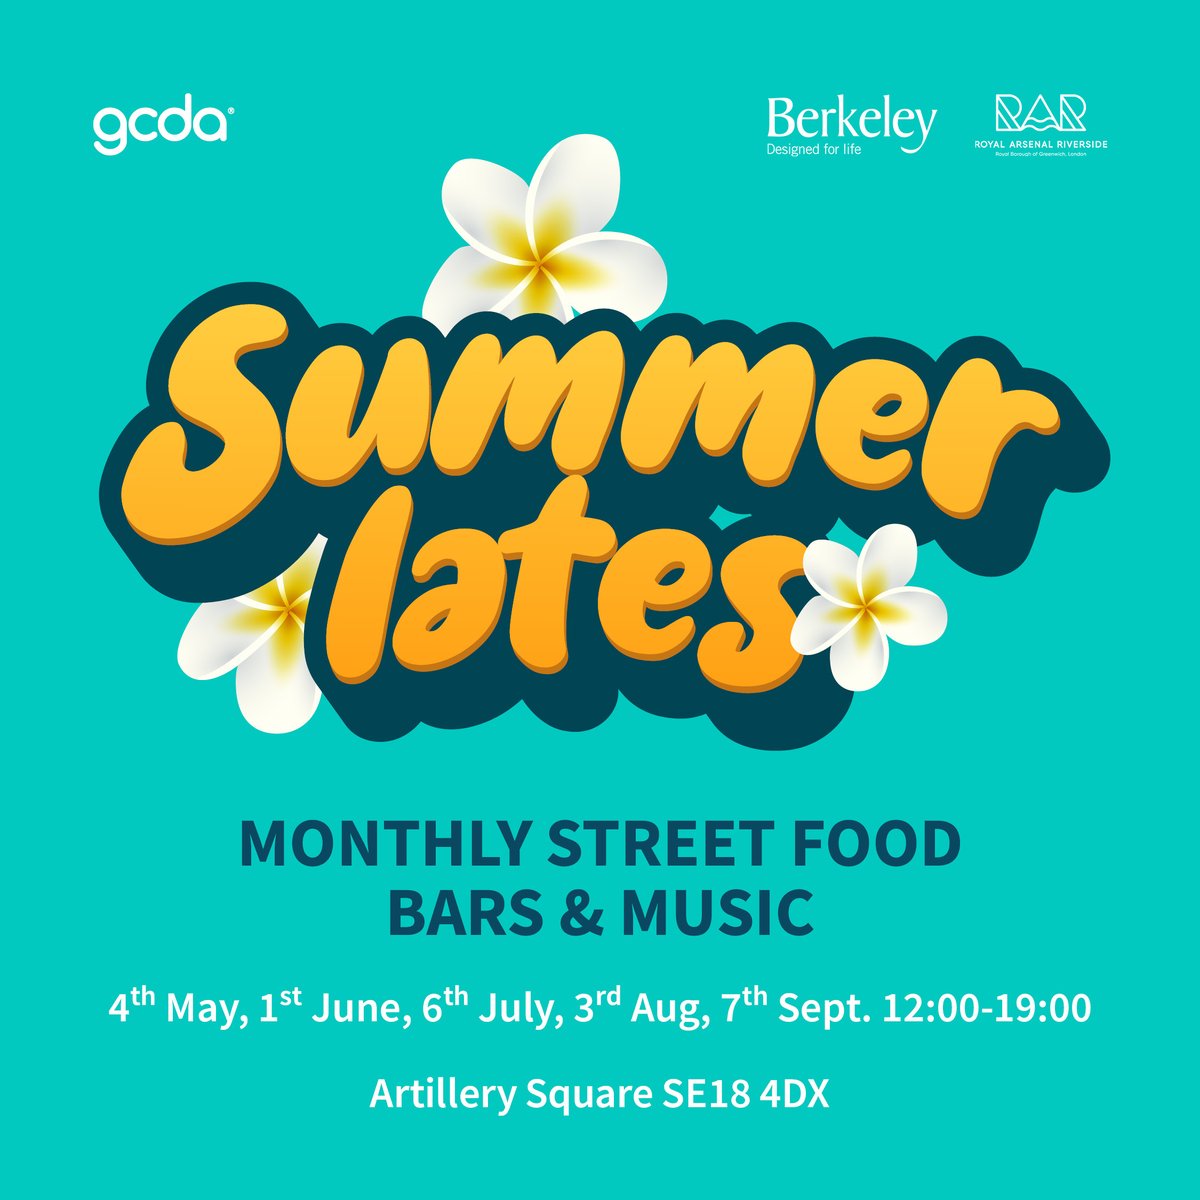 Join us for the first of this season's Royal Arsenal - Summer Lates, this Saturday 4th May, 12-7pm, Artillery Square, Woolwich! A medley of meals, music and merriment right by the river! See you there!